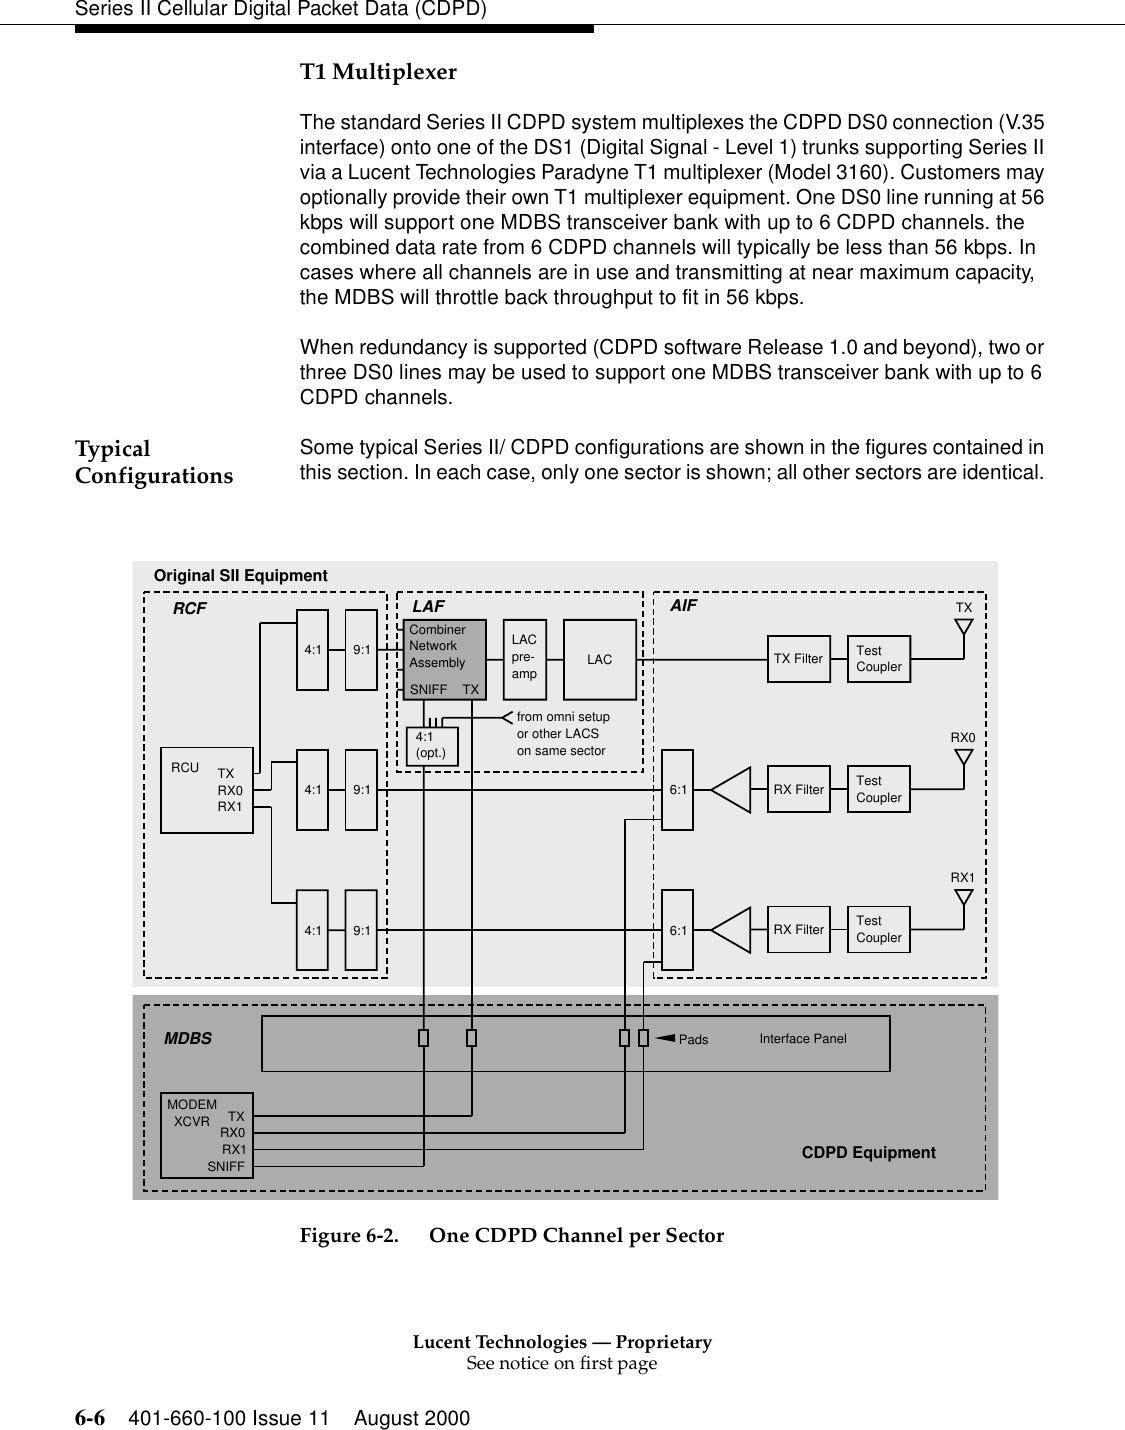 Lucent Technologies — ProprietarySee notice on first page6-6 401-660-100 Issue 11 August 2000Series II Cellular Digital Packet Data (CDPD)T1 MultiplexerThe standard Series II CDPD system multiplexes the CDPD DS0 connection (V.35 interface) onto one of the DS1 (Digital Signal - Level 1) trunks supporting Series II via a Lucent Technologies Paradyne T1 multiplexer (Model 3160). Customers may optionally provide their own T1 multiplexer equipment. One DS0 line running at 56 kbps will support one MDBS transceiver bank with up to 6 CDPD channels. the combined data rate from 6 CDPD channels will typically be less than 56 kbps. In cases where all channels are in use and transmitting at near maximum capacity, the MDBS will throttle back throughput to fit in 56 kbps. When redundancy is supported (CDPD software Release 1.0 and beyond), two or three DS0 lines may be used to support one MDBS transceiver bank with up to 6 CDPD channels. Typi cal Configurations Some typical Series II/ CDPD configurations are shown in the figures contained in this section. In each case, only one sector is shown; all other sectors are identical. Figure 6-2. One CDPD Channel per Sector4:1 9:1LAFCombinerNetworkAssemblySNIFF TXLACpre-amp LACfrom omni setupor other LACSon same sector4:1(opt.)TX Filter TestCouplerTX6:1 RX Filter TestCoupler4:1 9:14:1 9:1 6:1 RX Filter TestCouplerRX0RX1Pads Interface PanelMODEMXCVR TXRX0RX1SNIFFTXRX0RX1RCURCFMDBSOriginal SII EquipmentCDPD EquipmentAIF